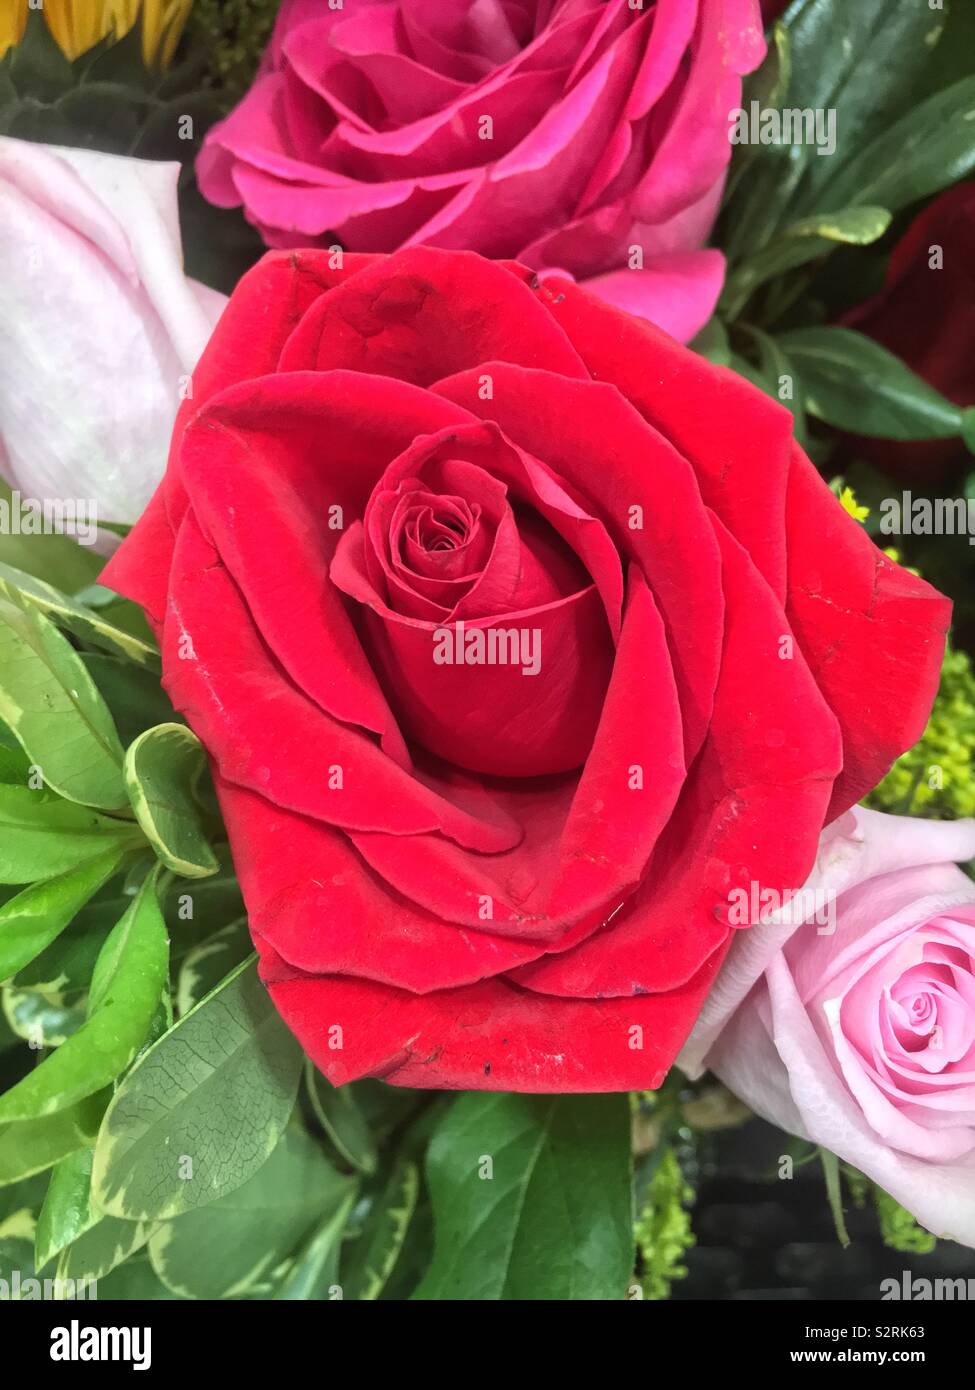 Beautiful bouquet of fresh roses with a big red rose in full bloom in the center. Stock Photo